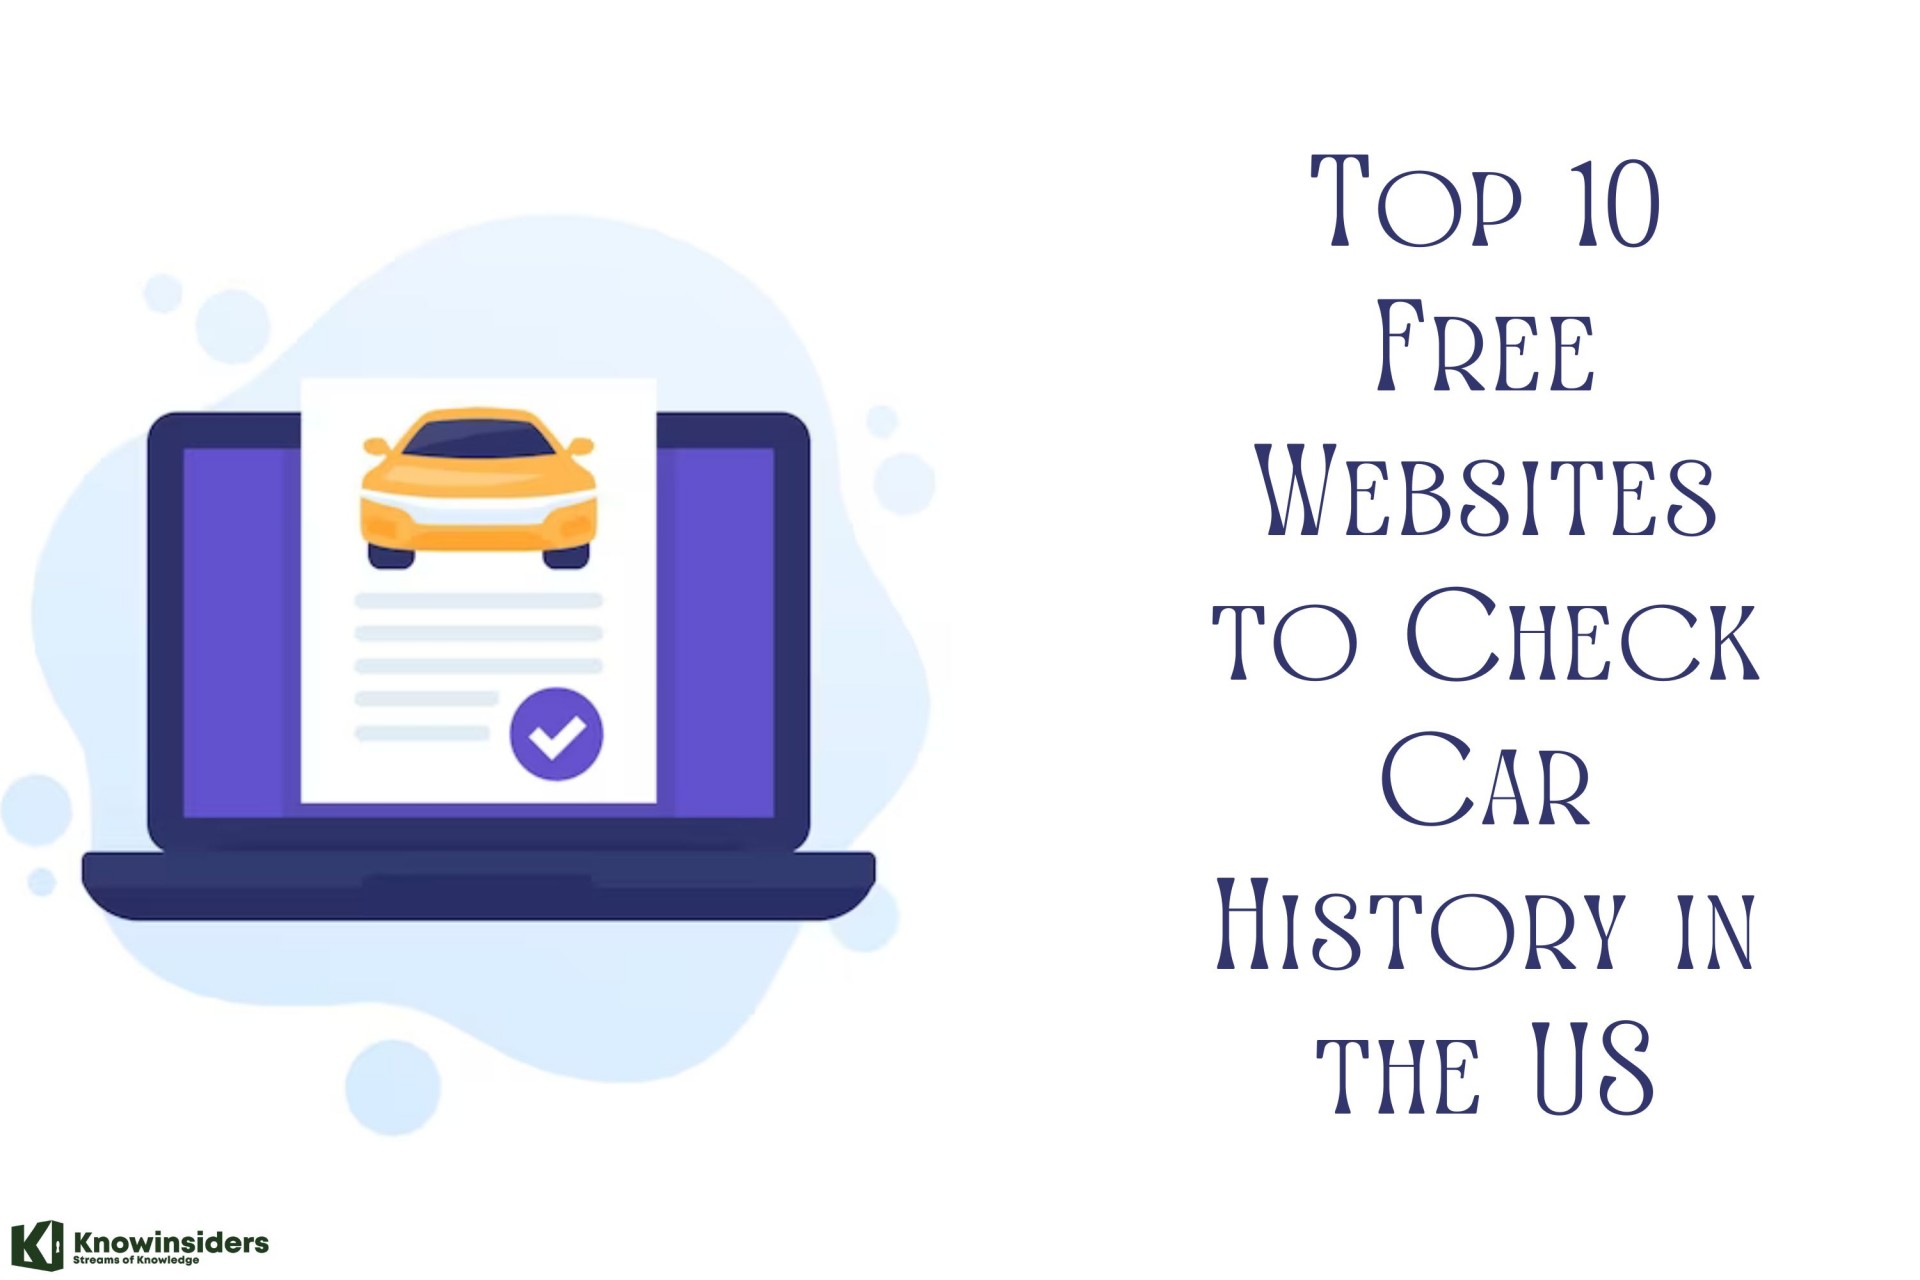 How to Check A Car History in the U.S - Top 10 Free Sites to Find the VIN